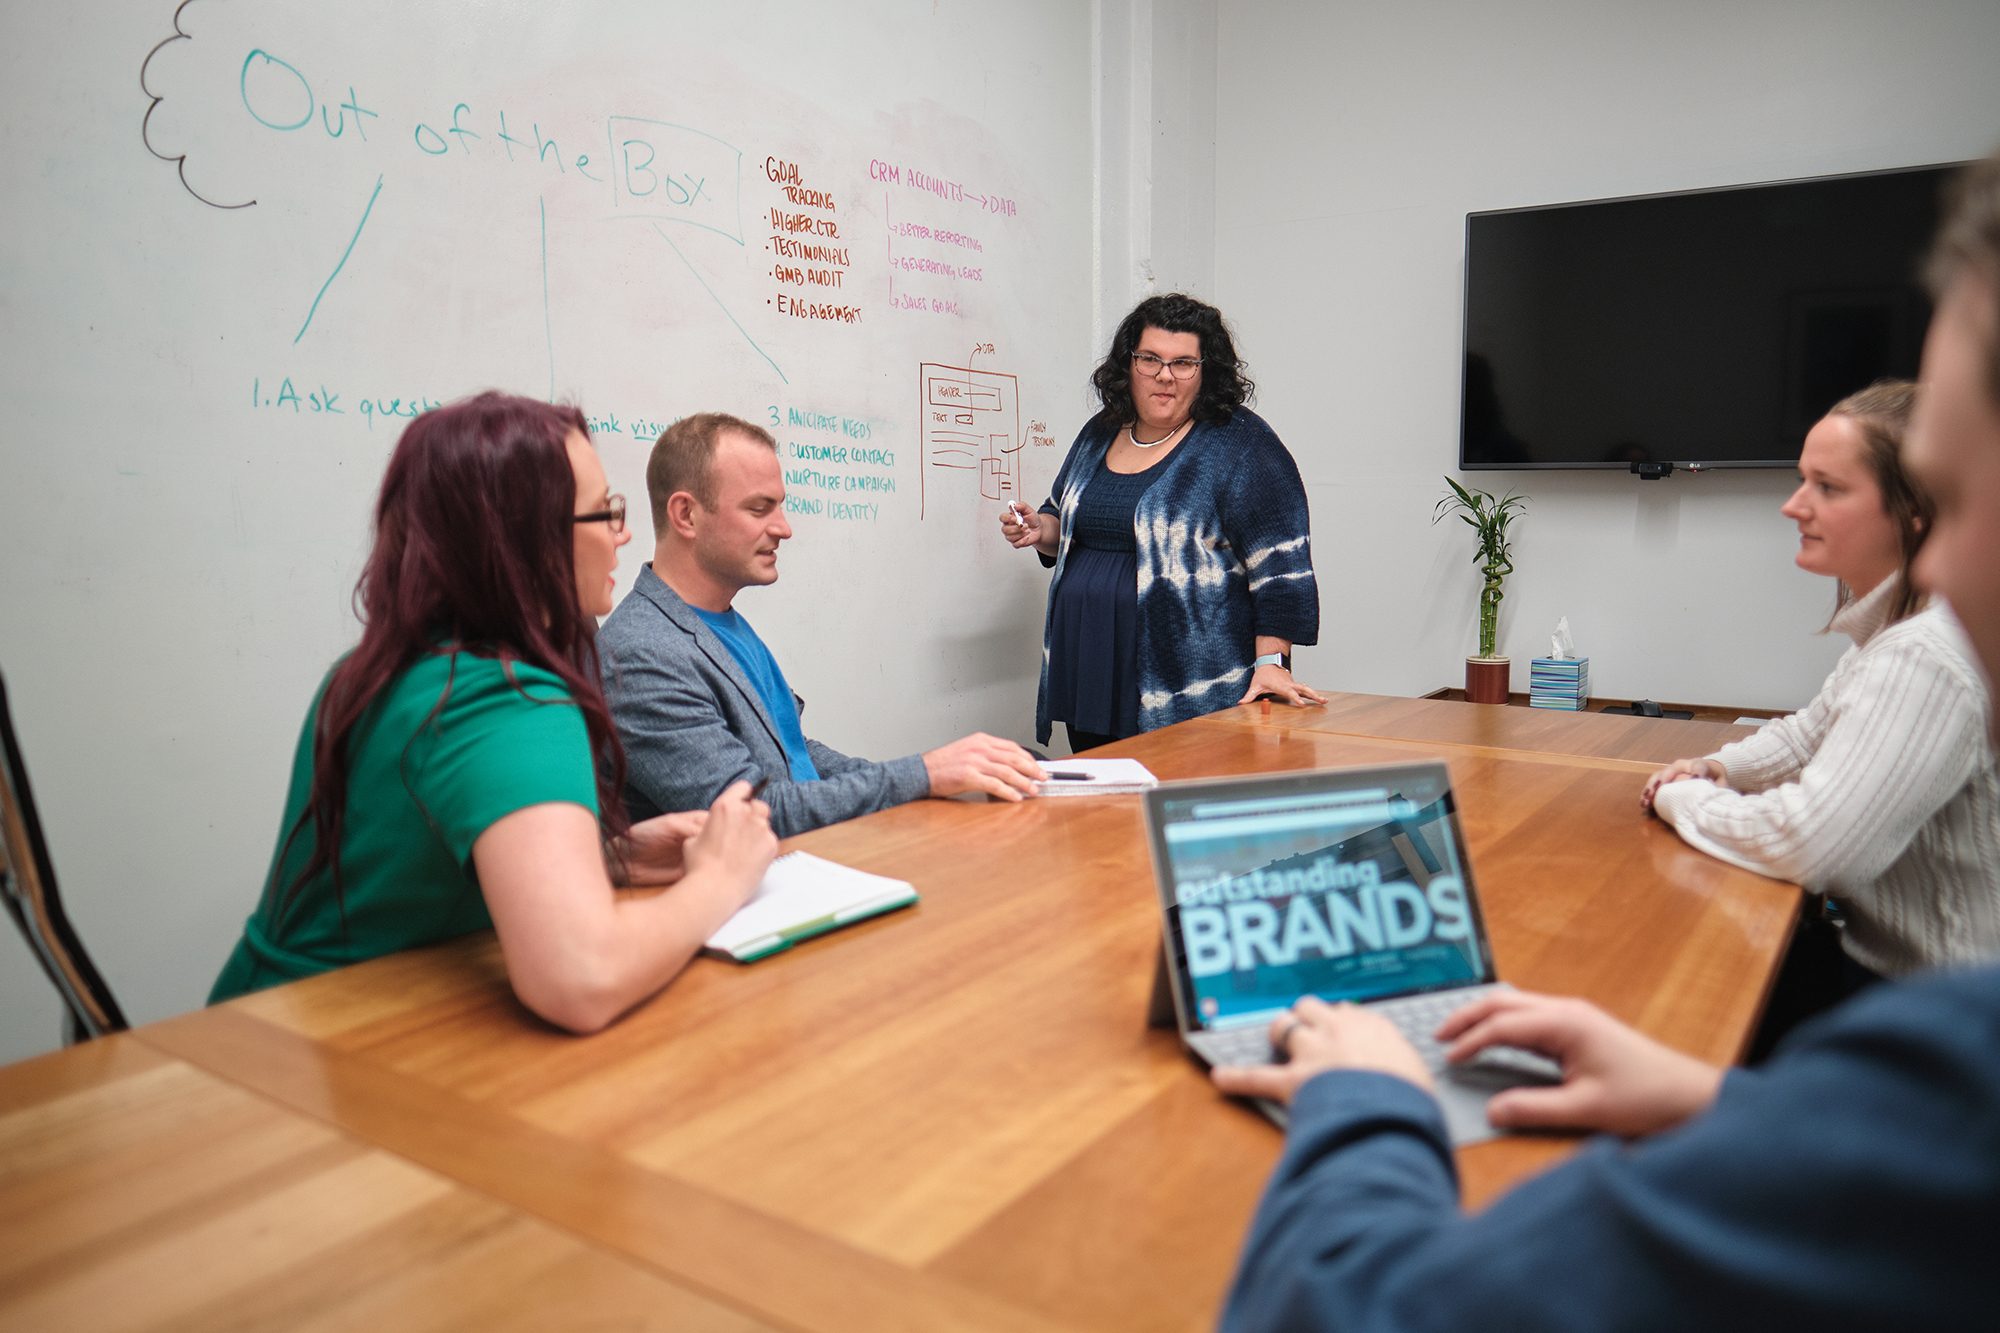 a team of marketers work in a conference room in front of a white board brainstorming ways to create new social media marketing campaigns